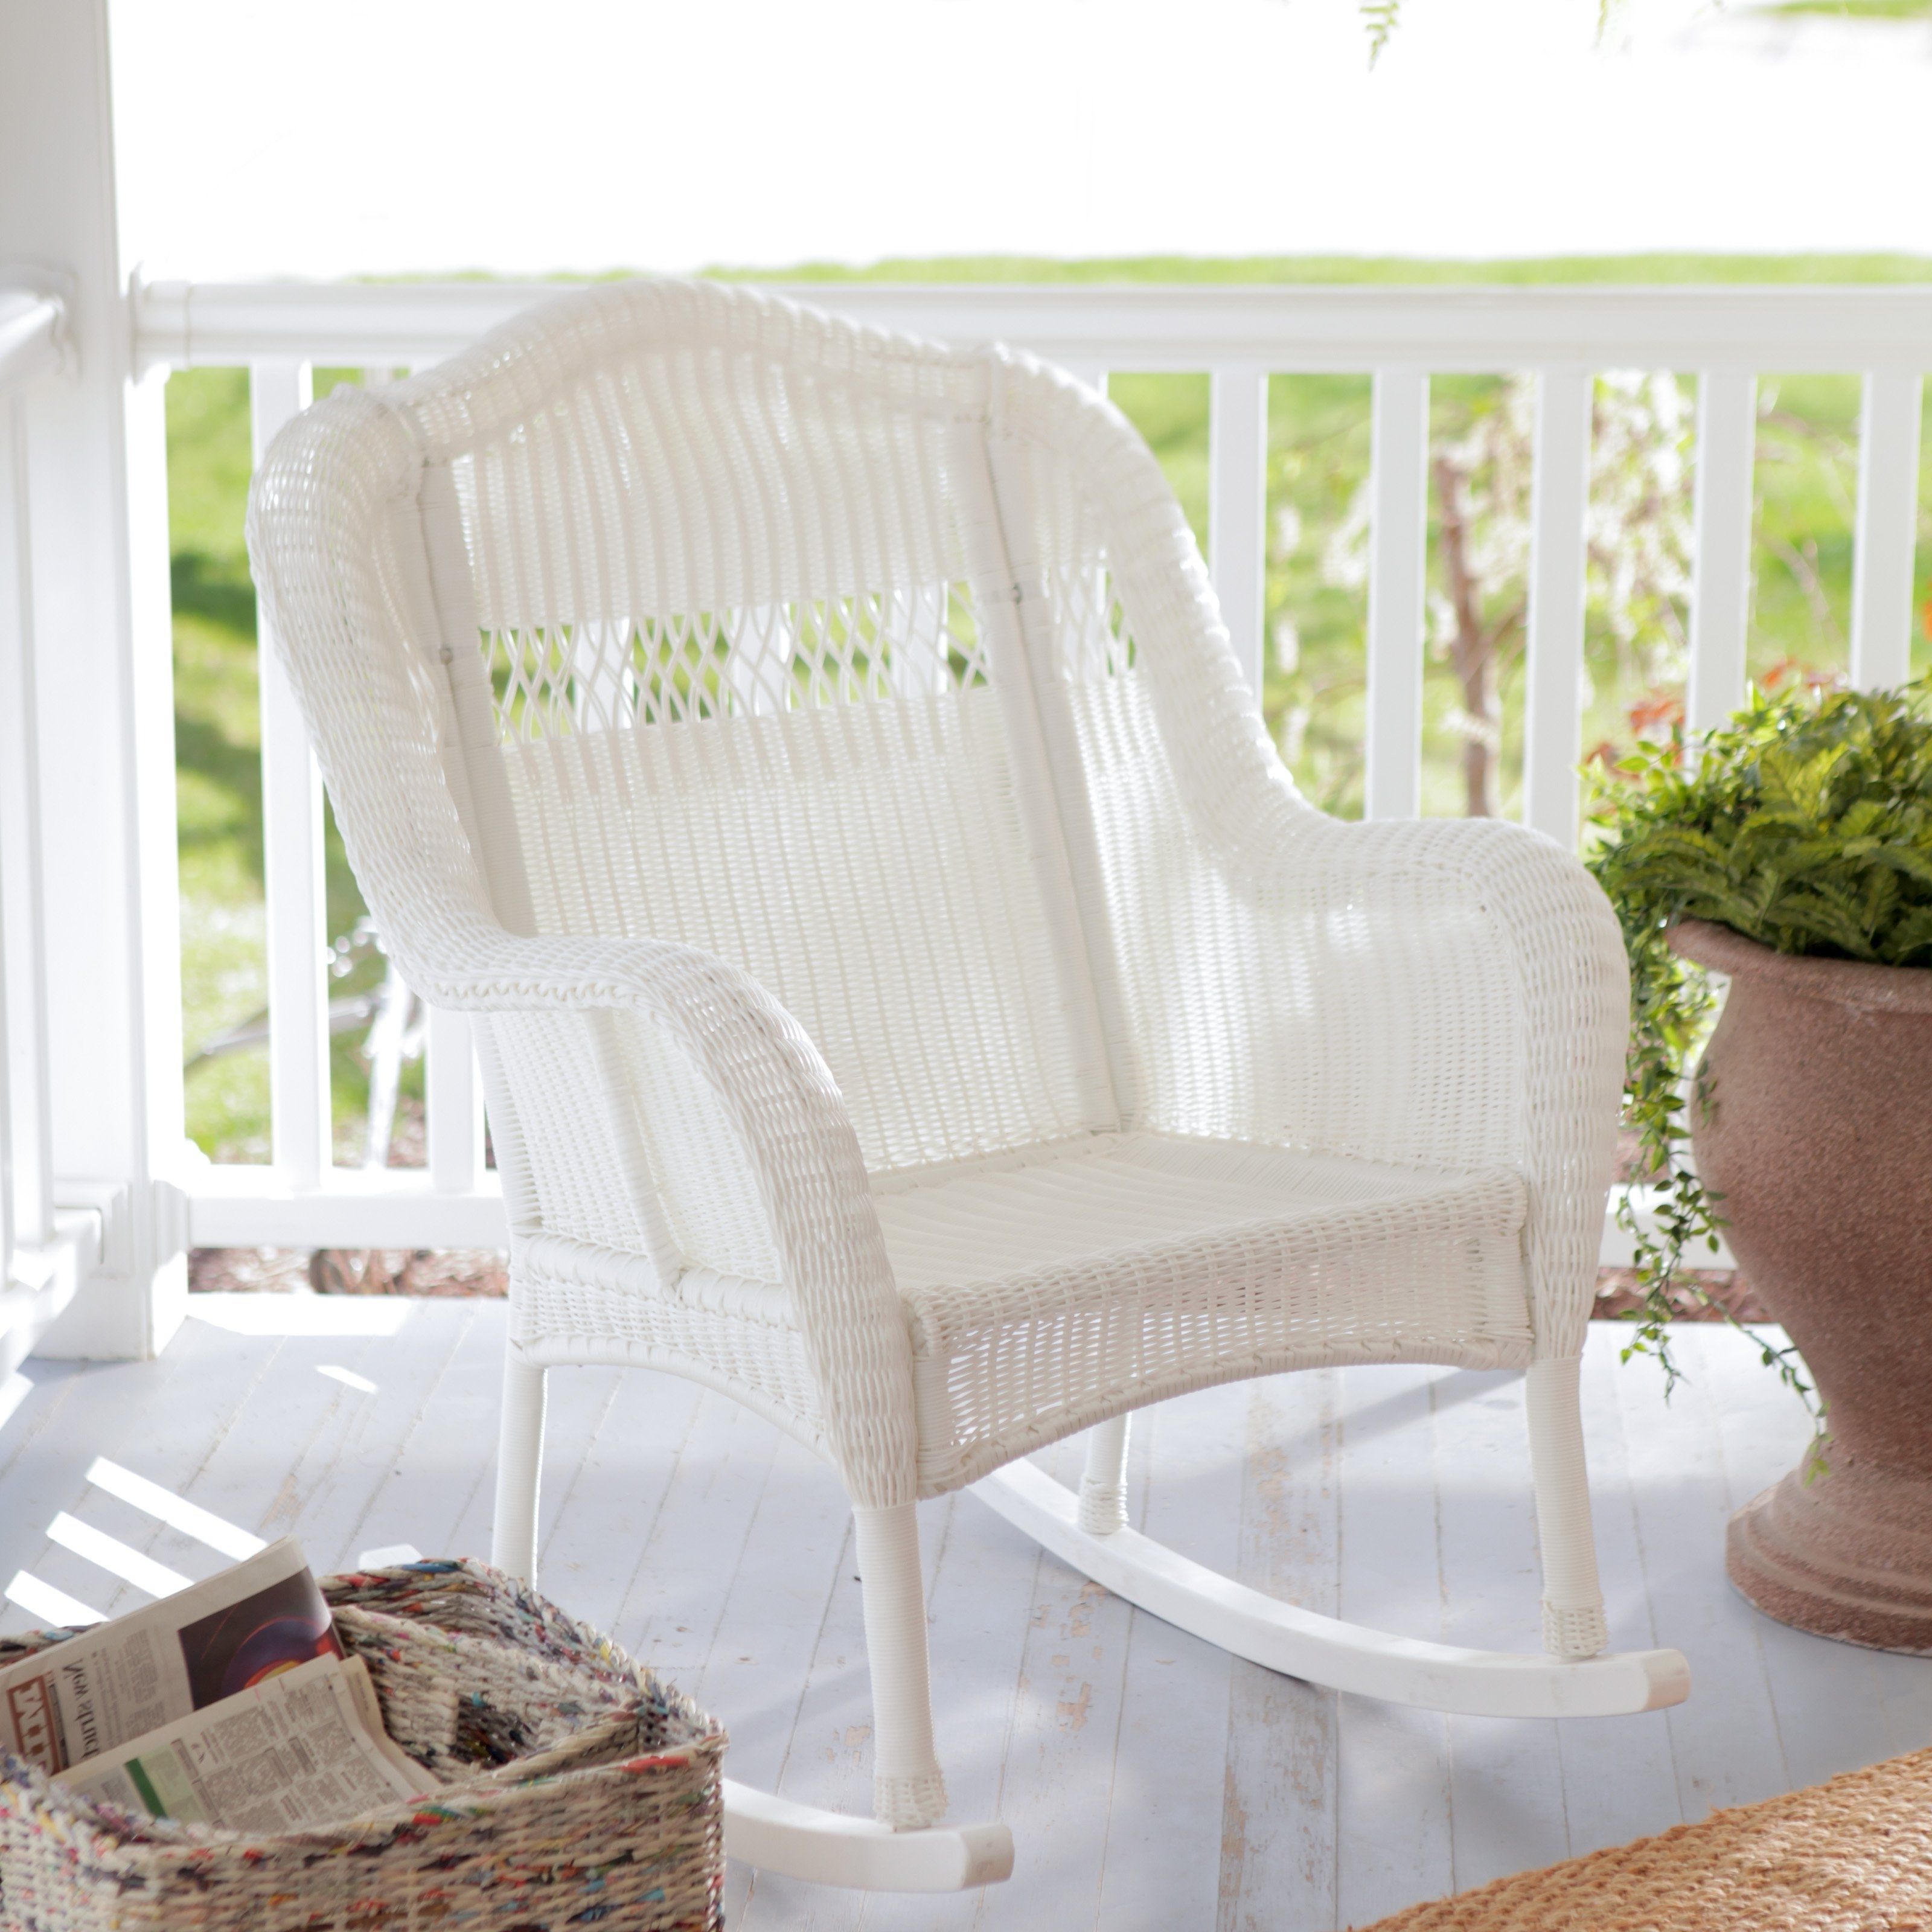 Most Recent Marvelous White Wicker Rocking Chair On Stunning Barstools And Regarding White Wicker Rocking Chairs (View 13 of 20)